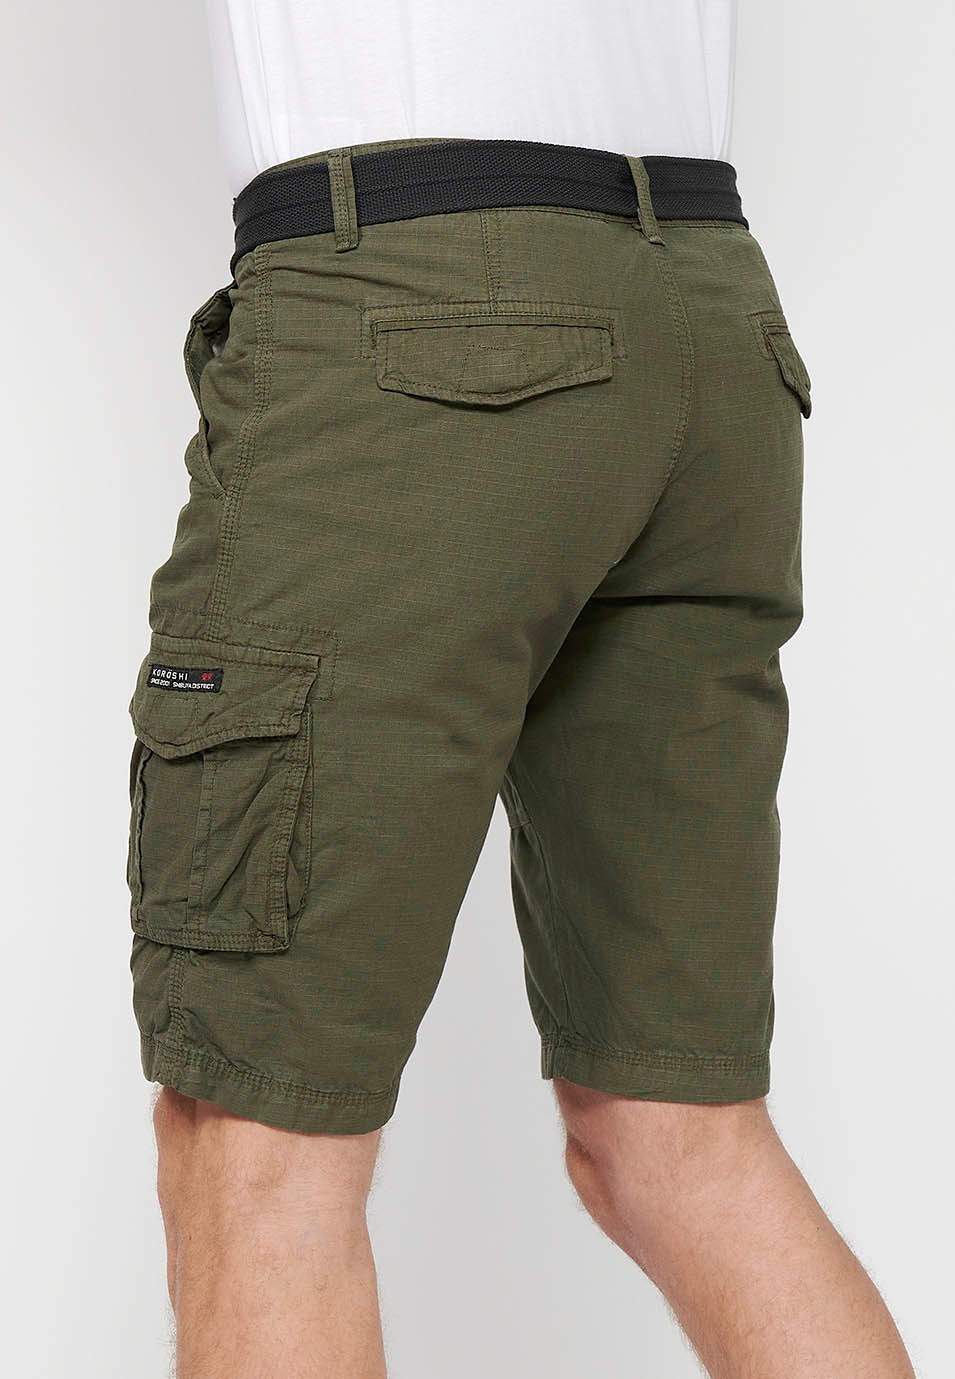 Cotton cargo shorts with belt and front closure with zipper and button with pockets, two back pockets with flap and two green cargo pants for Men 7